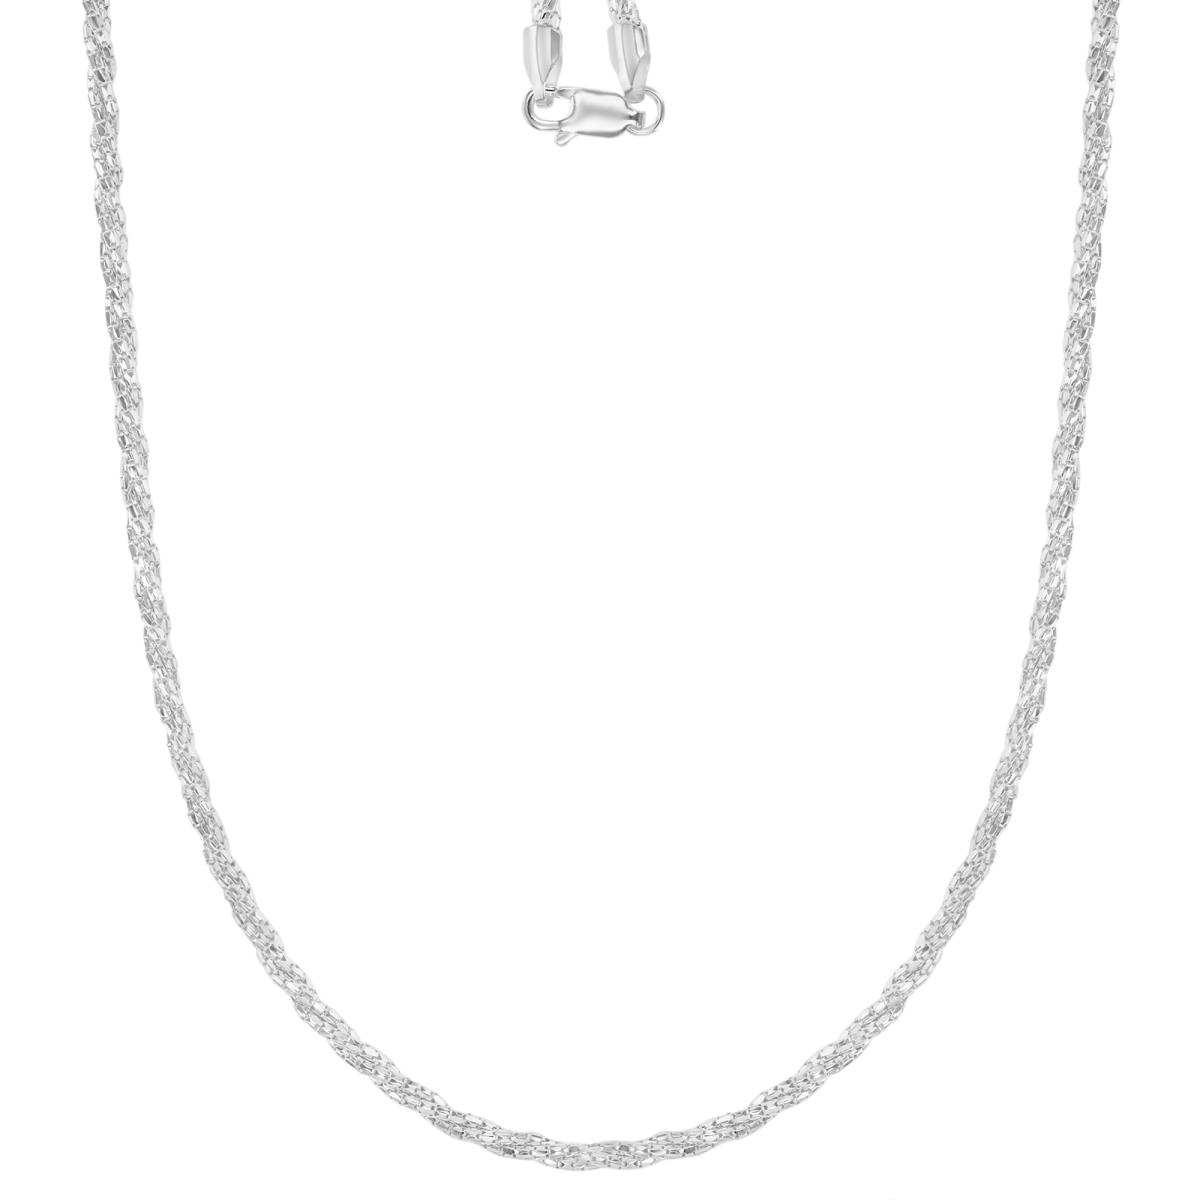 Sterling Silver Anti-Tarnish 2MM Polished & Diamond Cut Twisted Rope 20" Chain Necklace